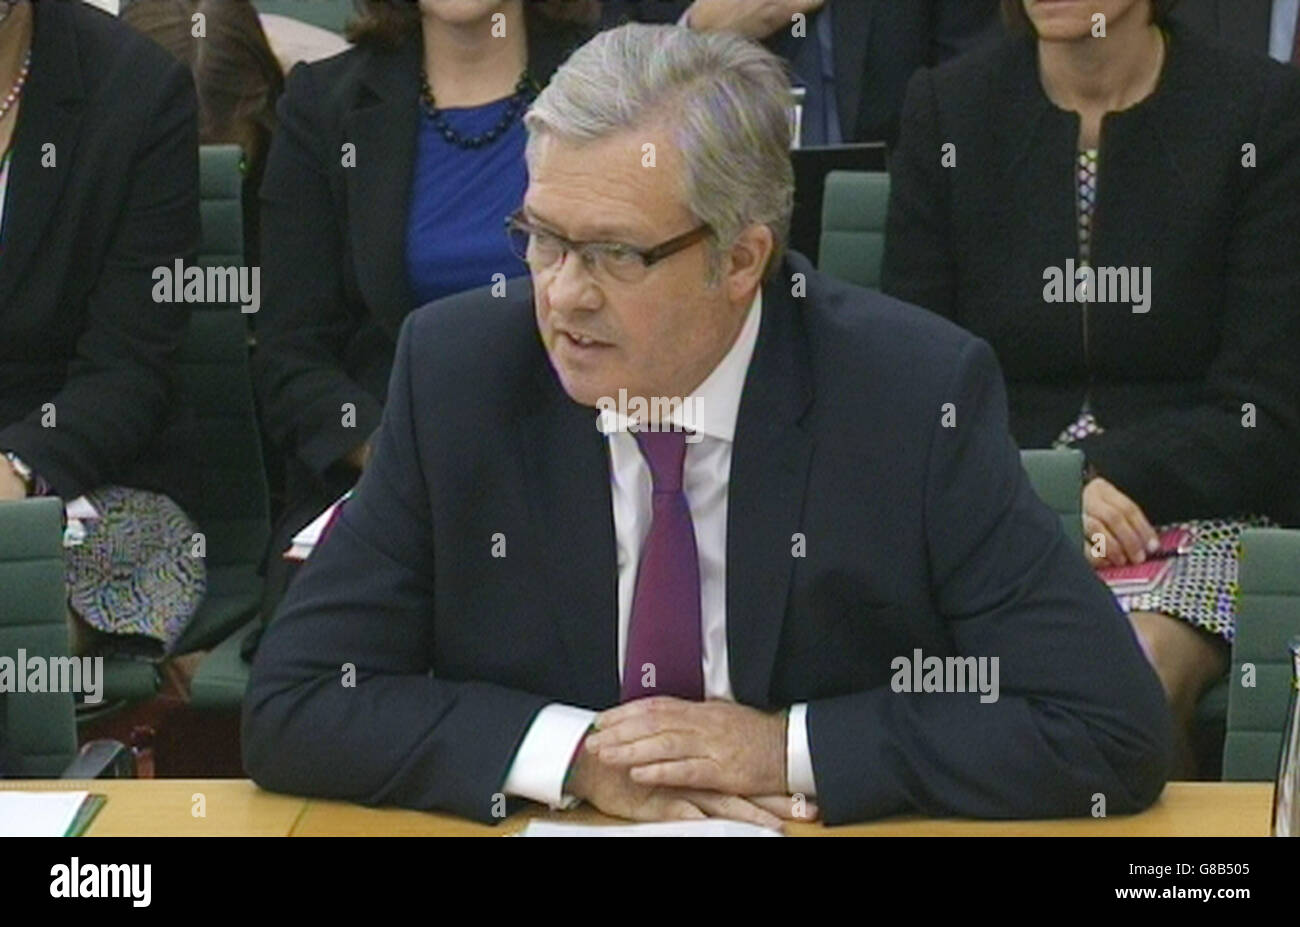 Paul Willis, the managing director of Volkswagen Group UK, speaks during a Transport Select Committee on the VW diesel emissions scandal, at Portcullis House, Westminster. Stock Photo